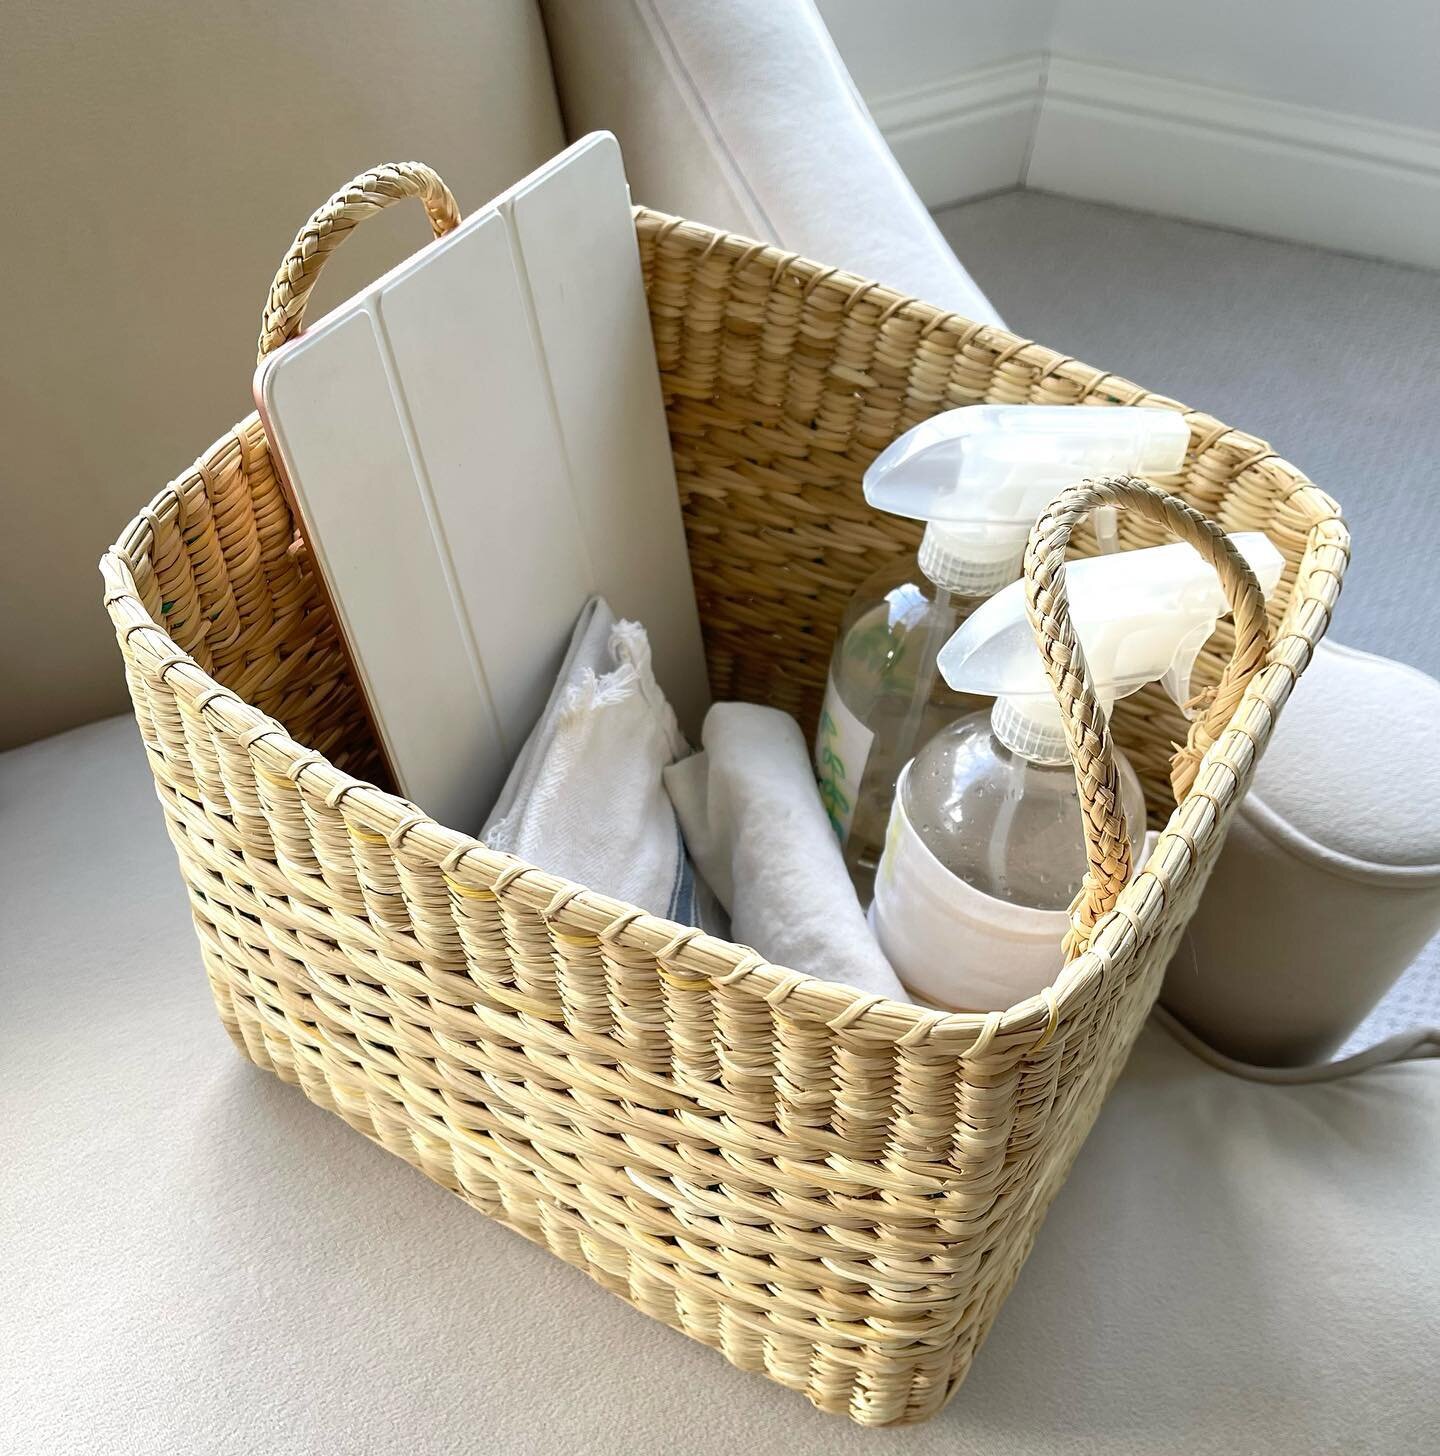 🧺 To Potter

I have a new post up on my blog today. What is pottering? Why have a basket for it? Why I find it an incredibly calming way to tidy. 

Join me on the blog and find out all of the things. It&rsquo;s very calm there. Simply click the link